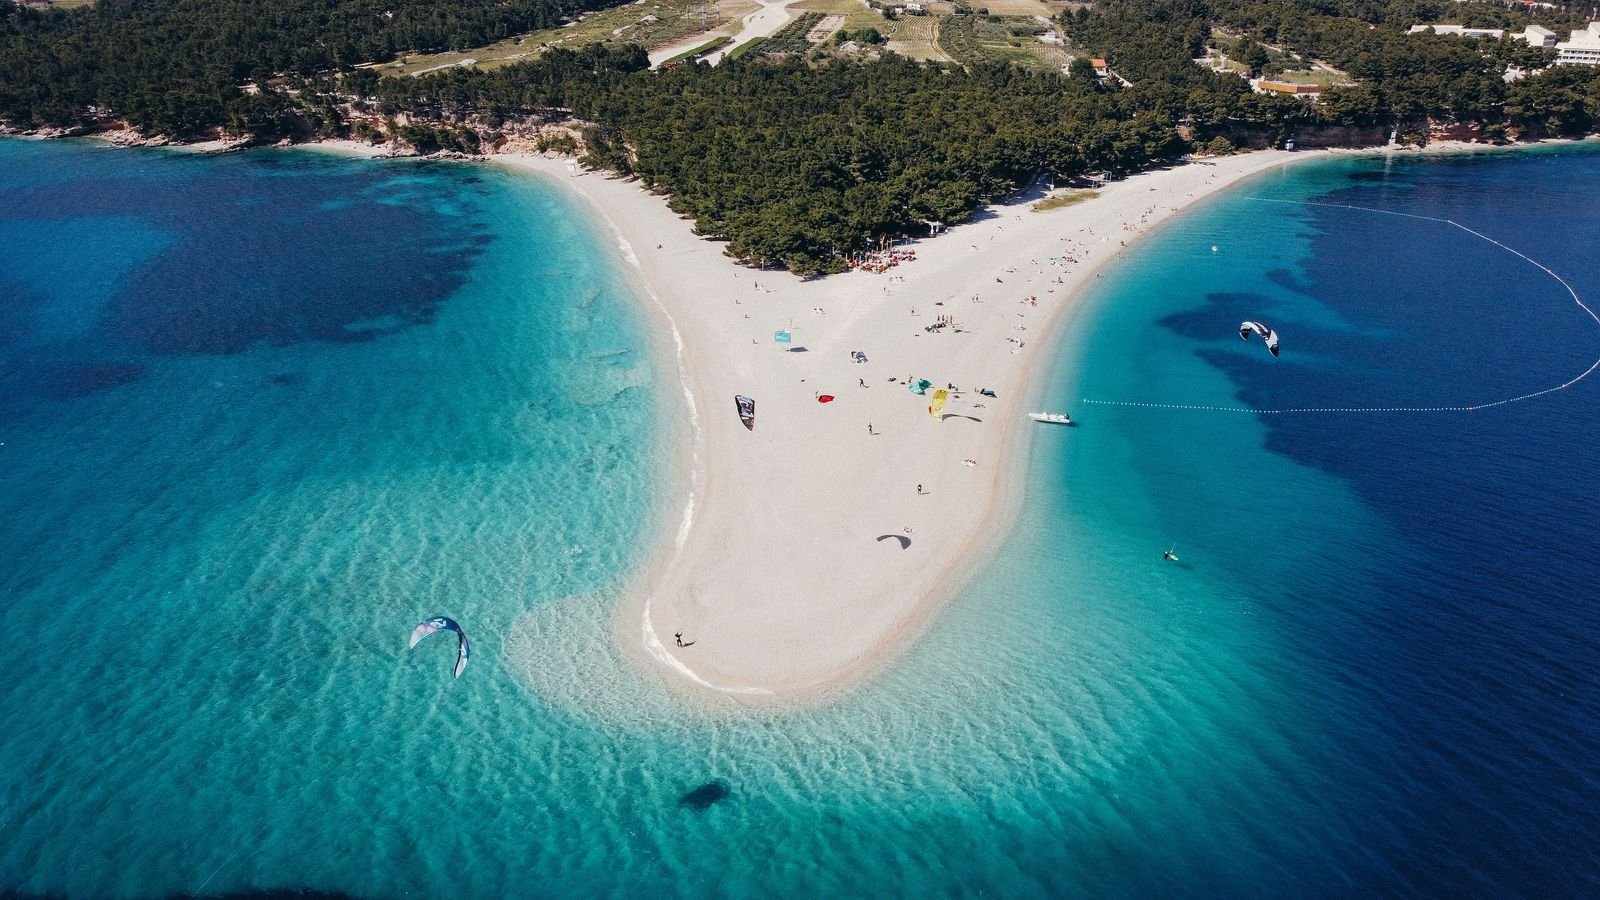 A beach sand bar stretching into the turquoise blue water of Brac Island in Croatia